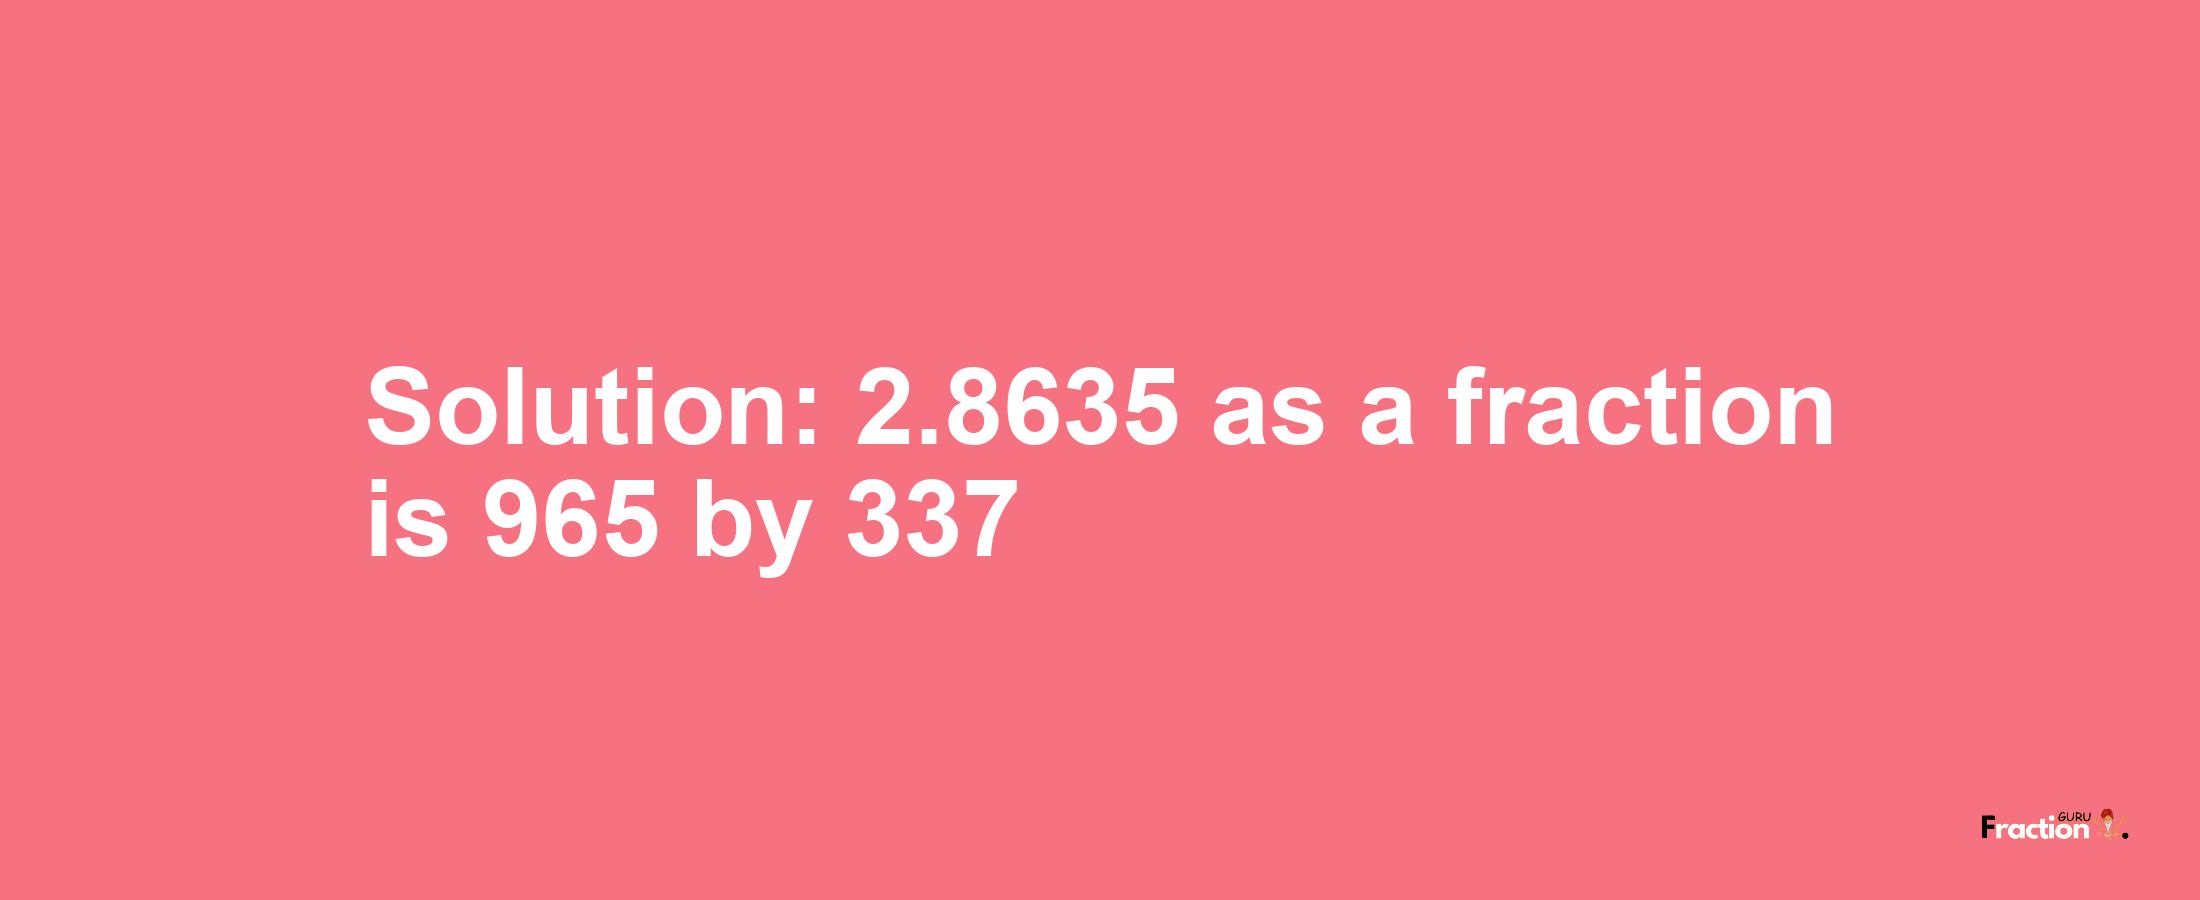 Solution:2.8635 as a fraction is 965/337